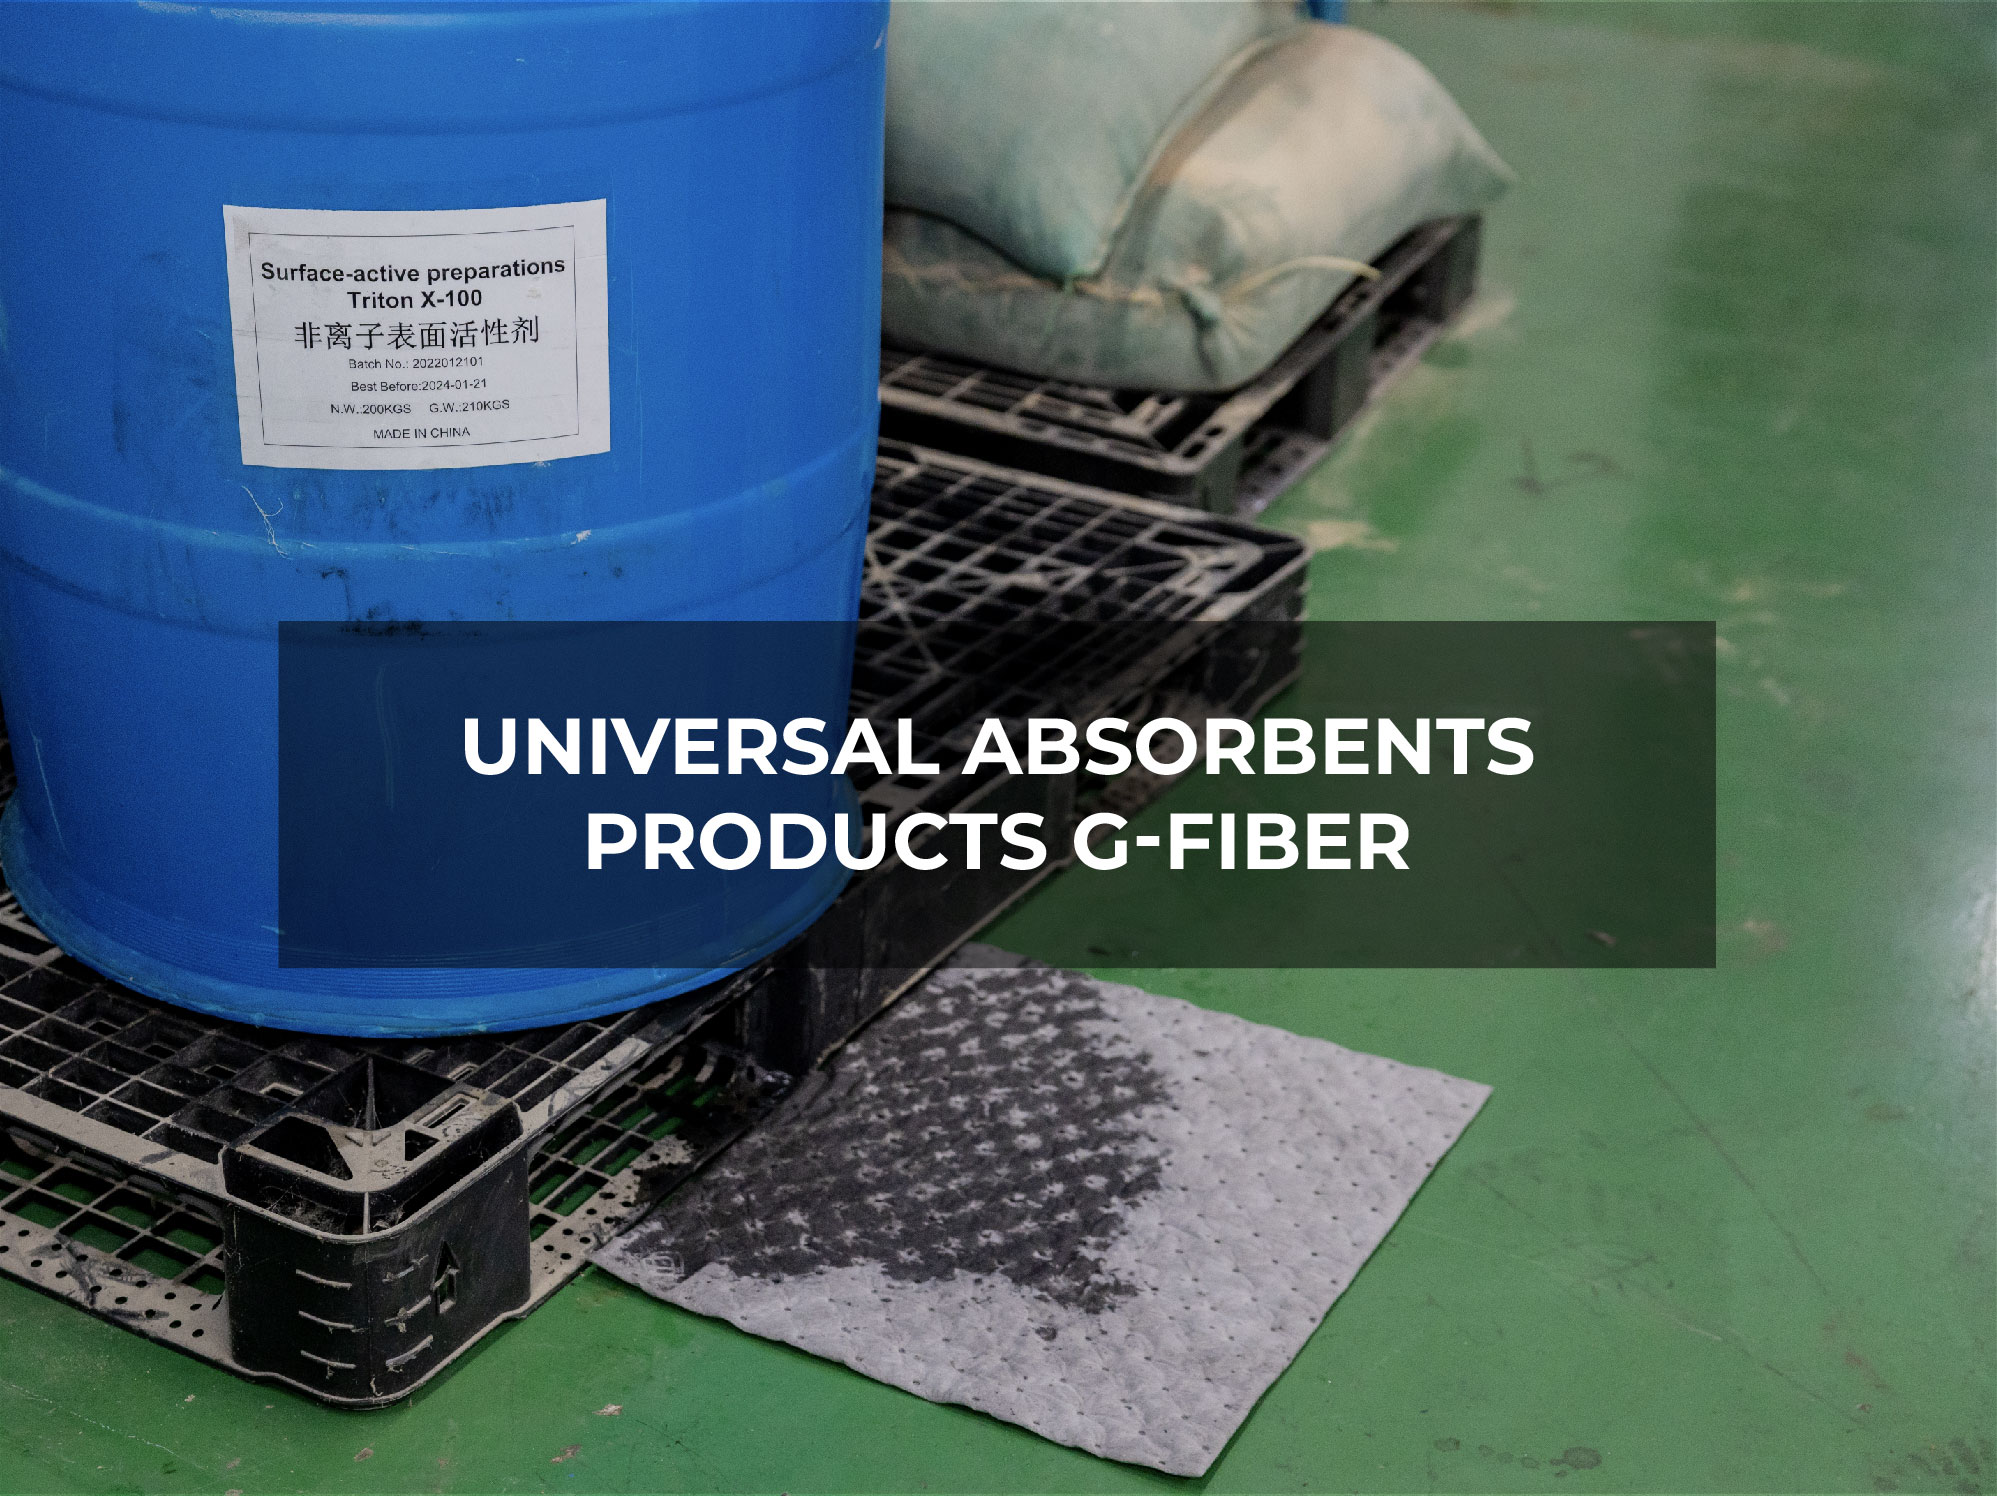 UNIVERSAL ABSORBENTS